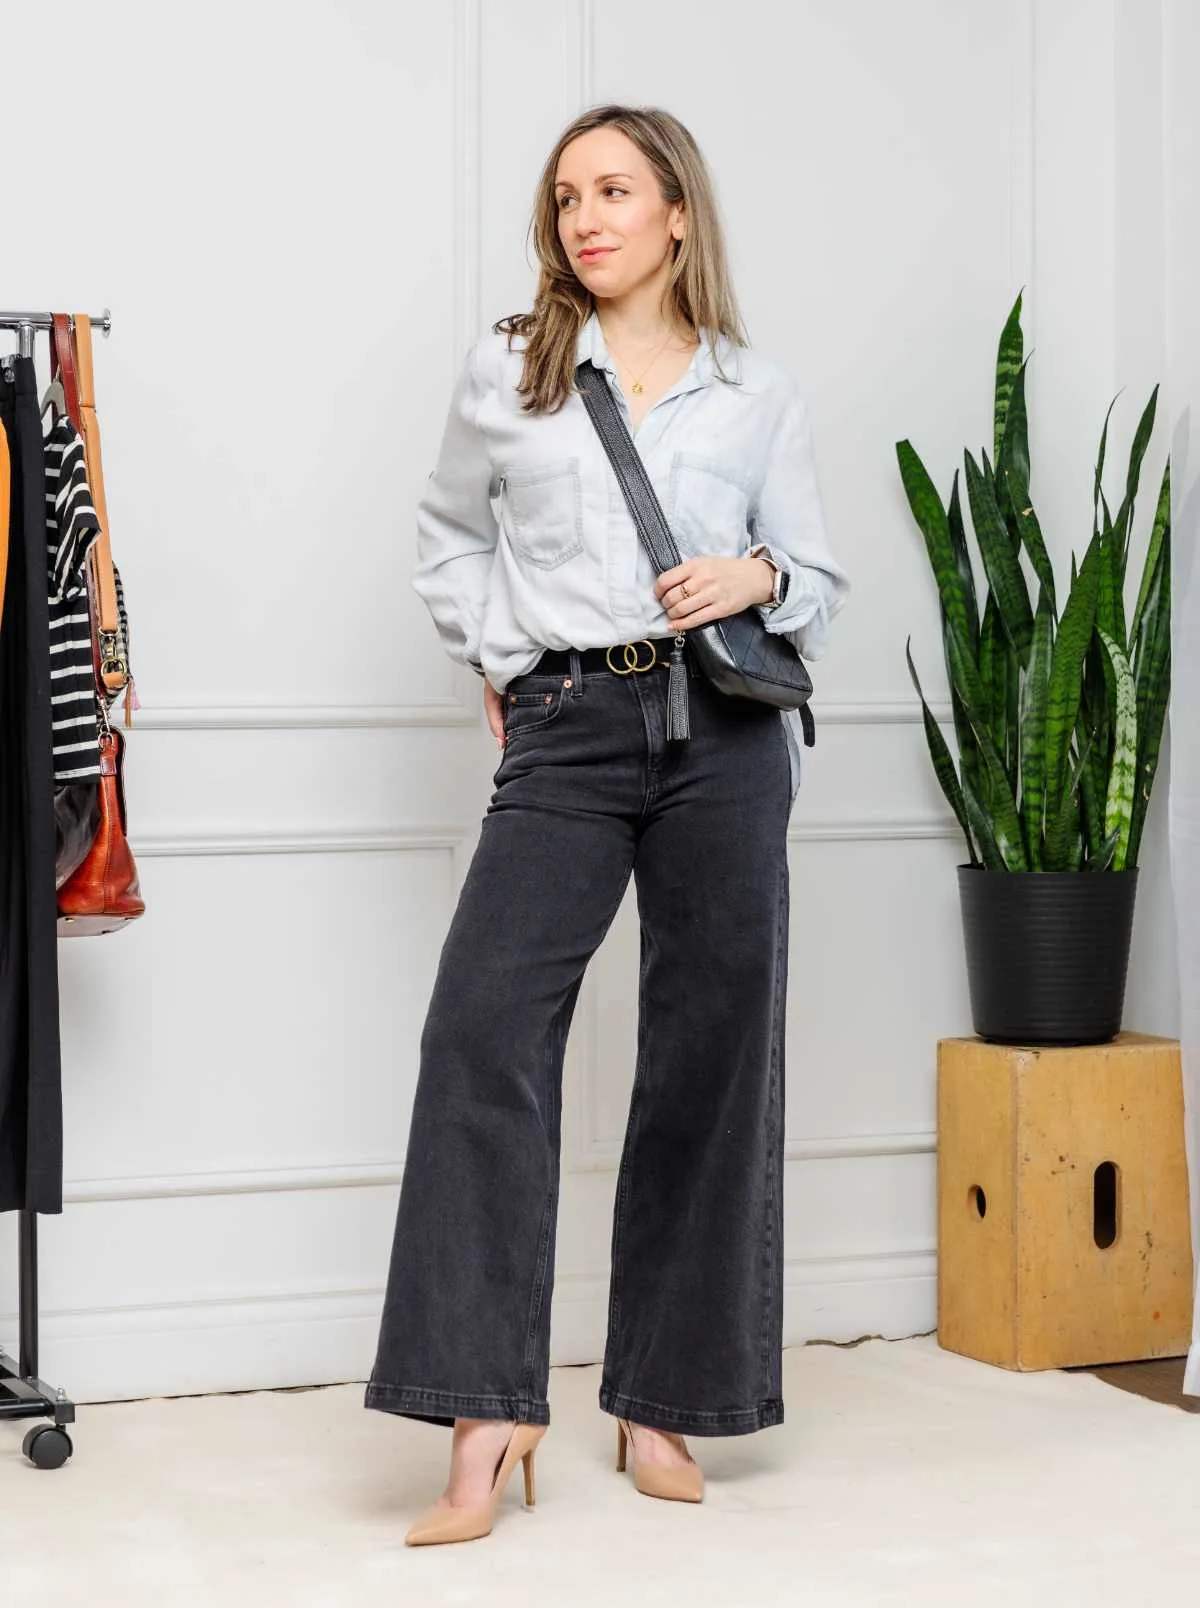 What Shoes to Wear with Wide Leg Jeans for Fall/Winter Outfits